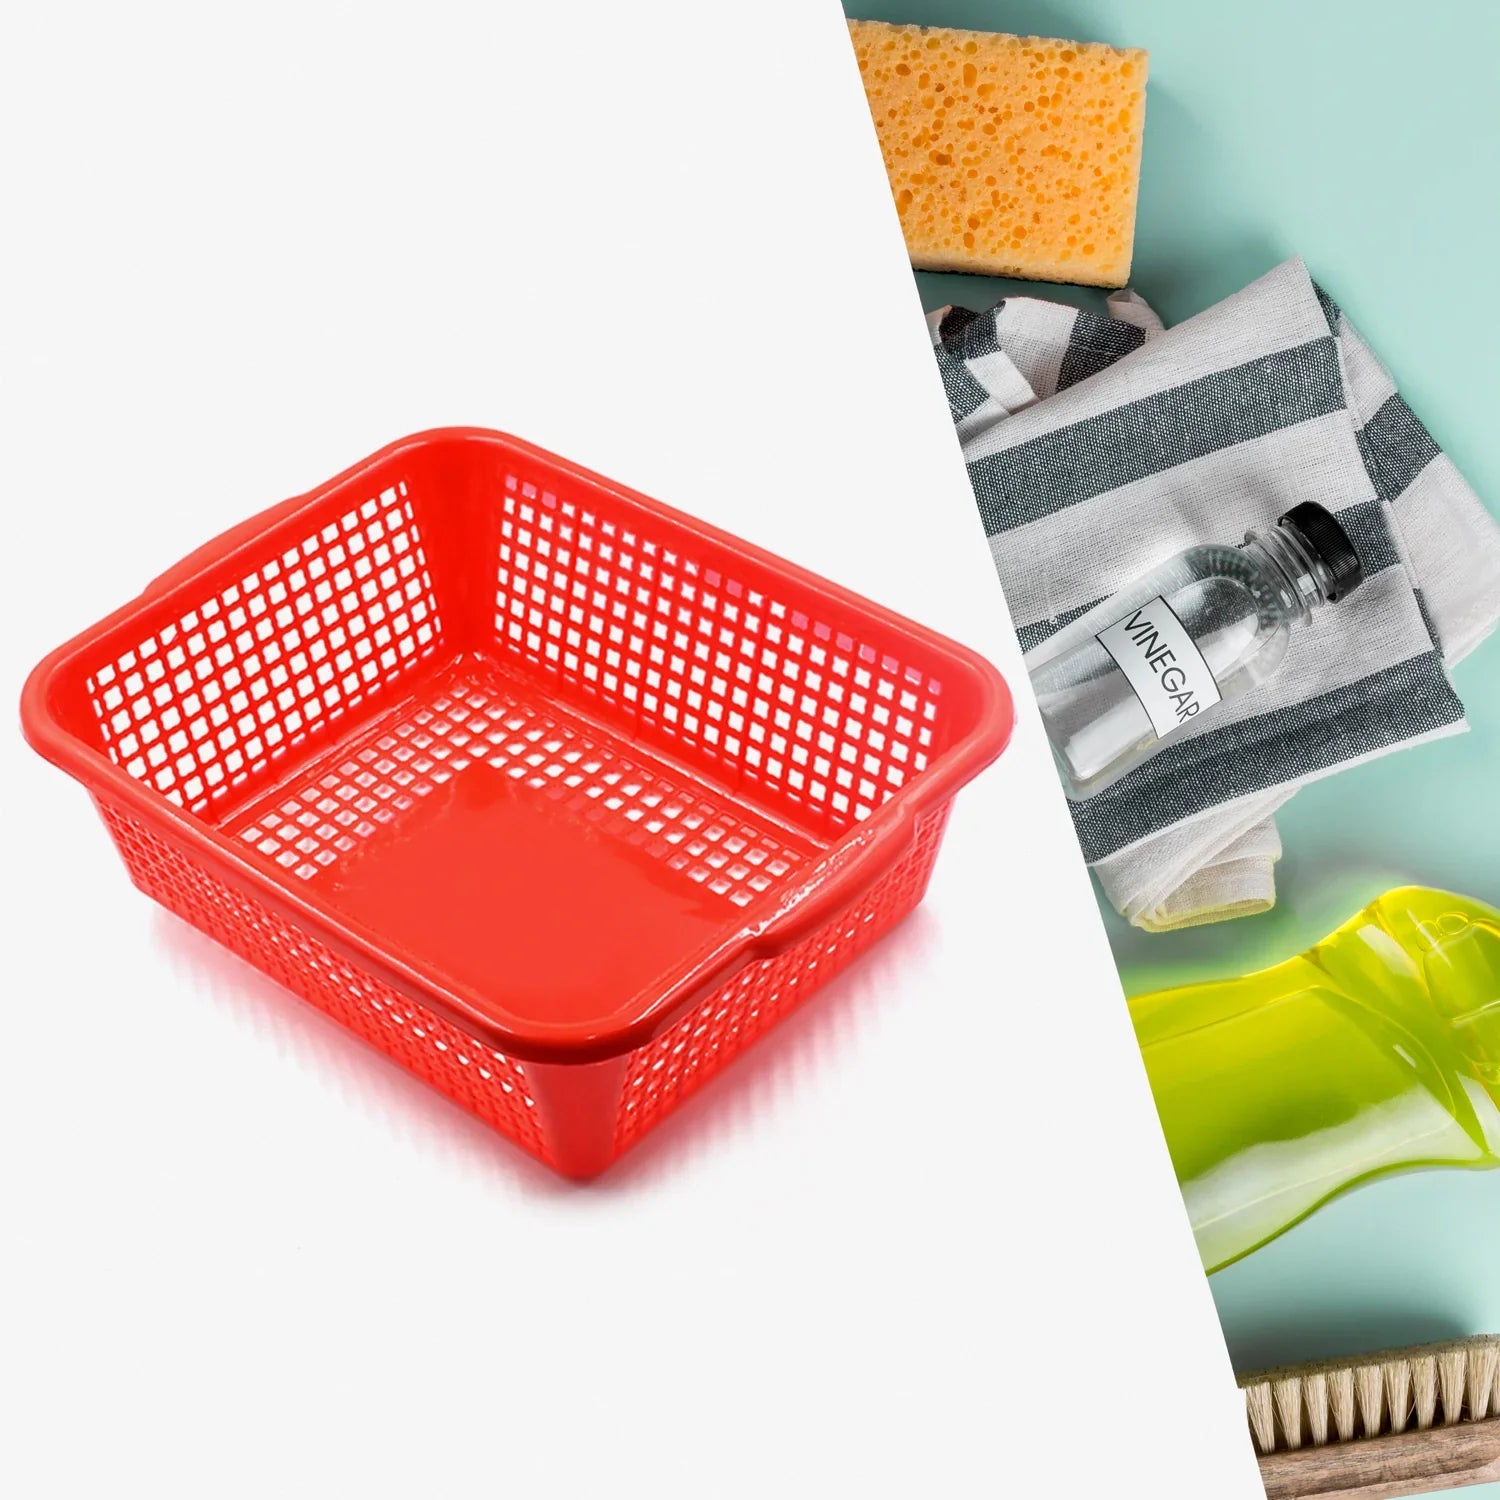 5542 Plastic 1 Pc Kitchen Small Size Dish Rack Drainer Vegetables and Fruits Washing Basket Dish Rack Multipurpose Organizers (29x22CM Mix Color)